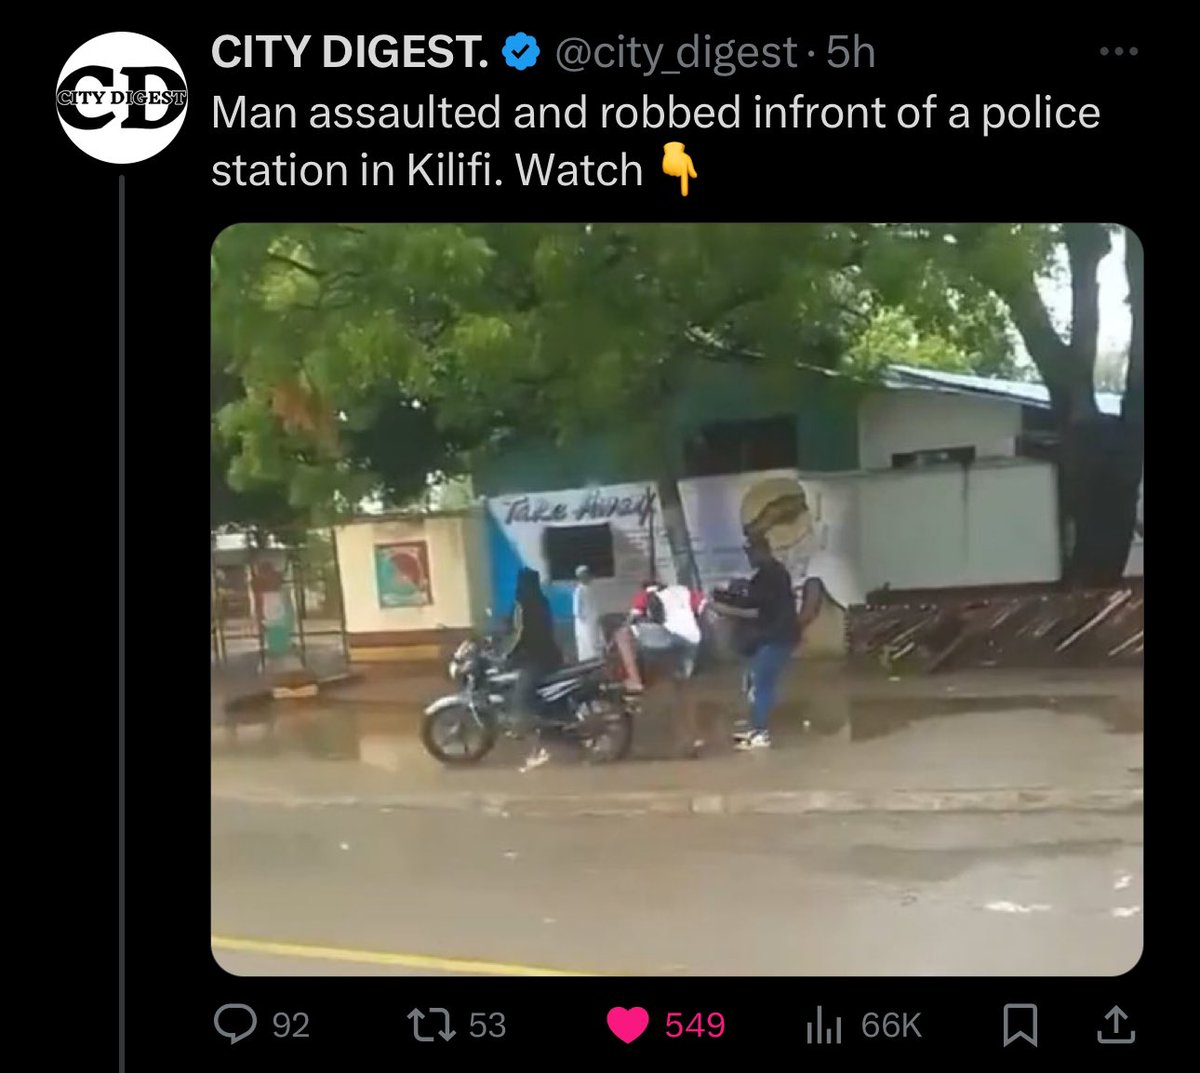 TIKTOK PRANK GONE WRONG

Police have arrested four people for filming a TikTok prank video outside the Kilifi Police Station. Watch👇